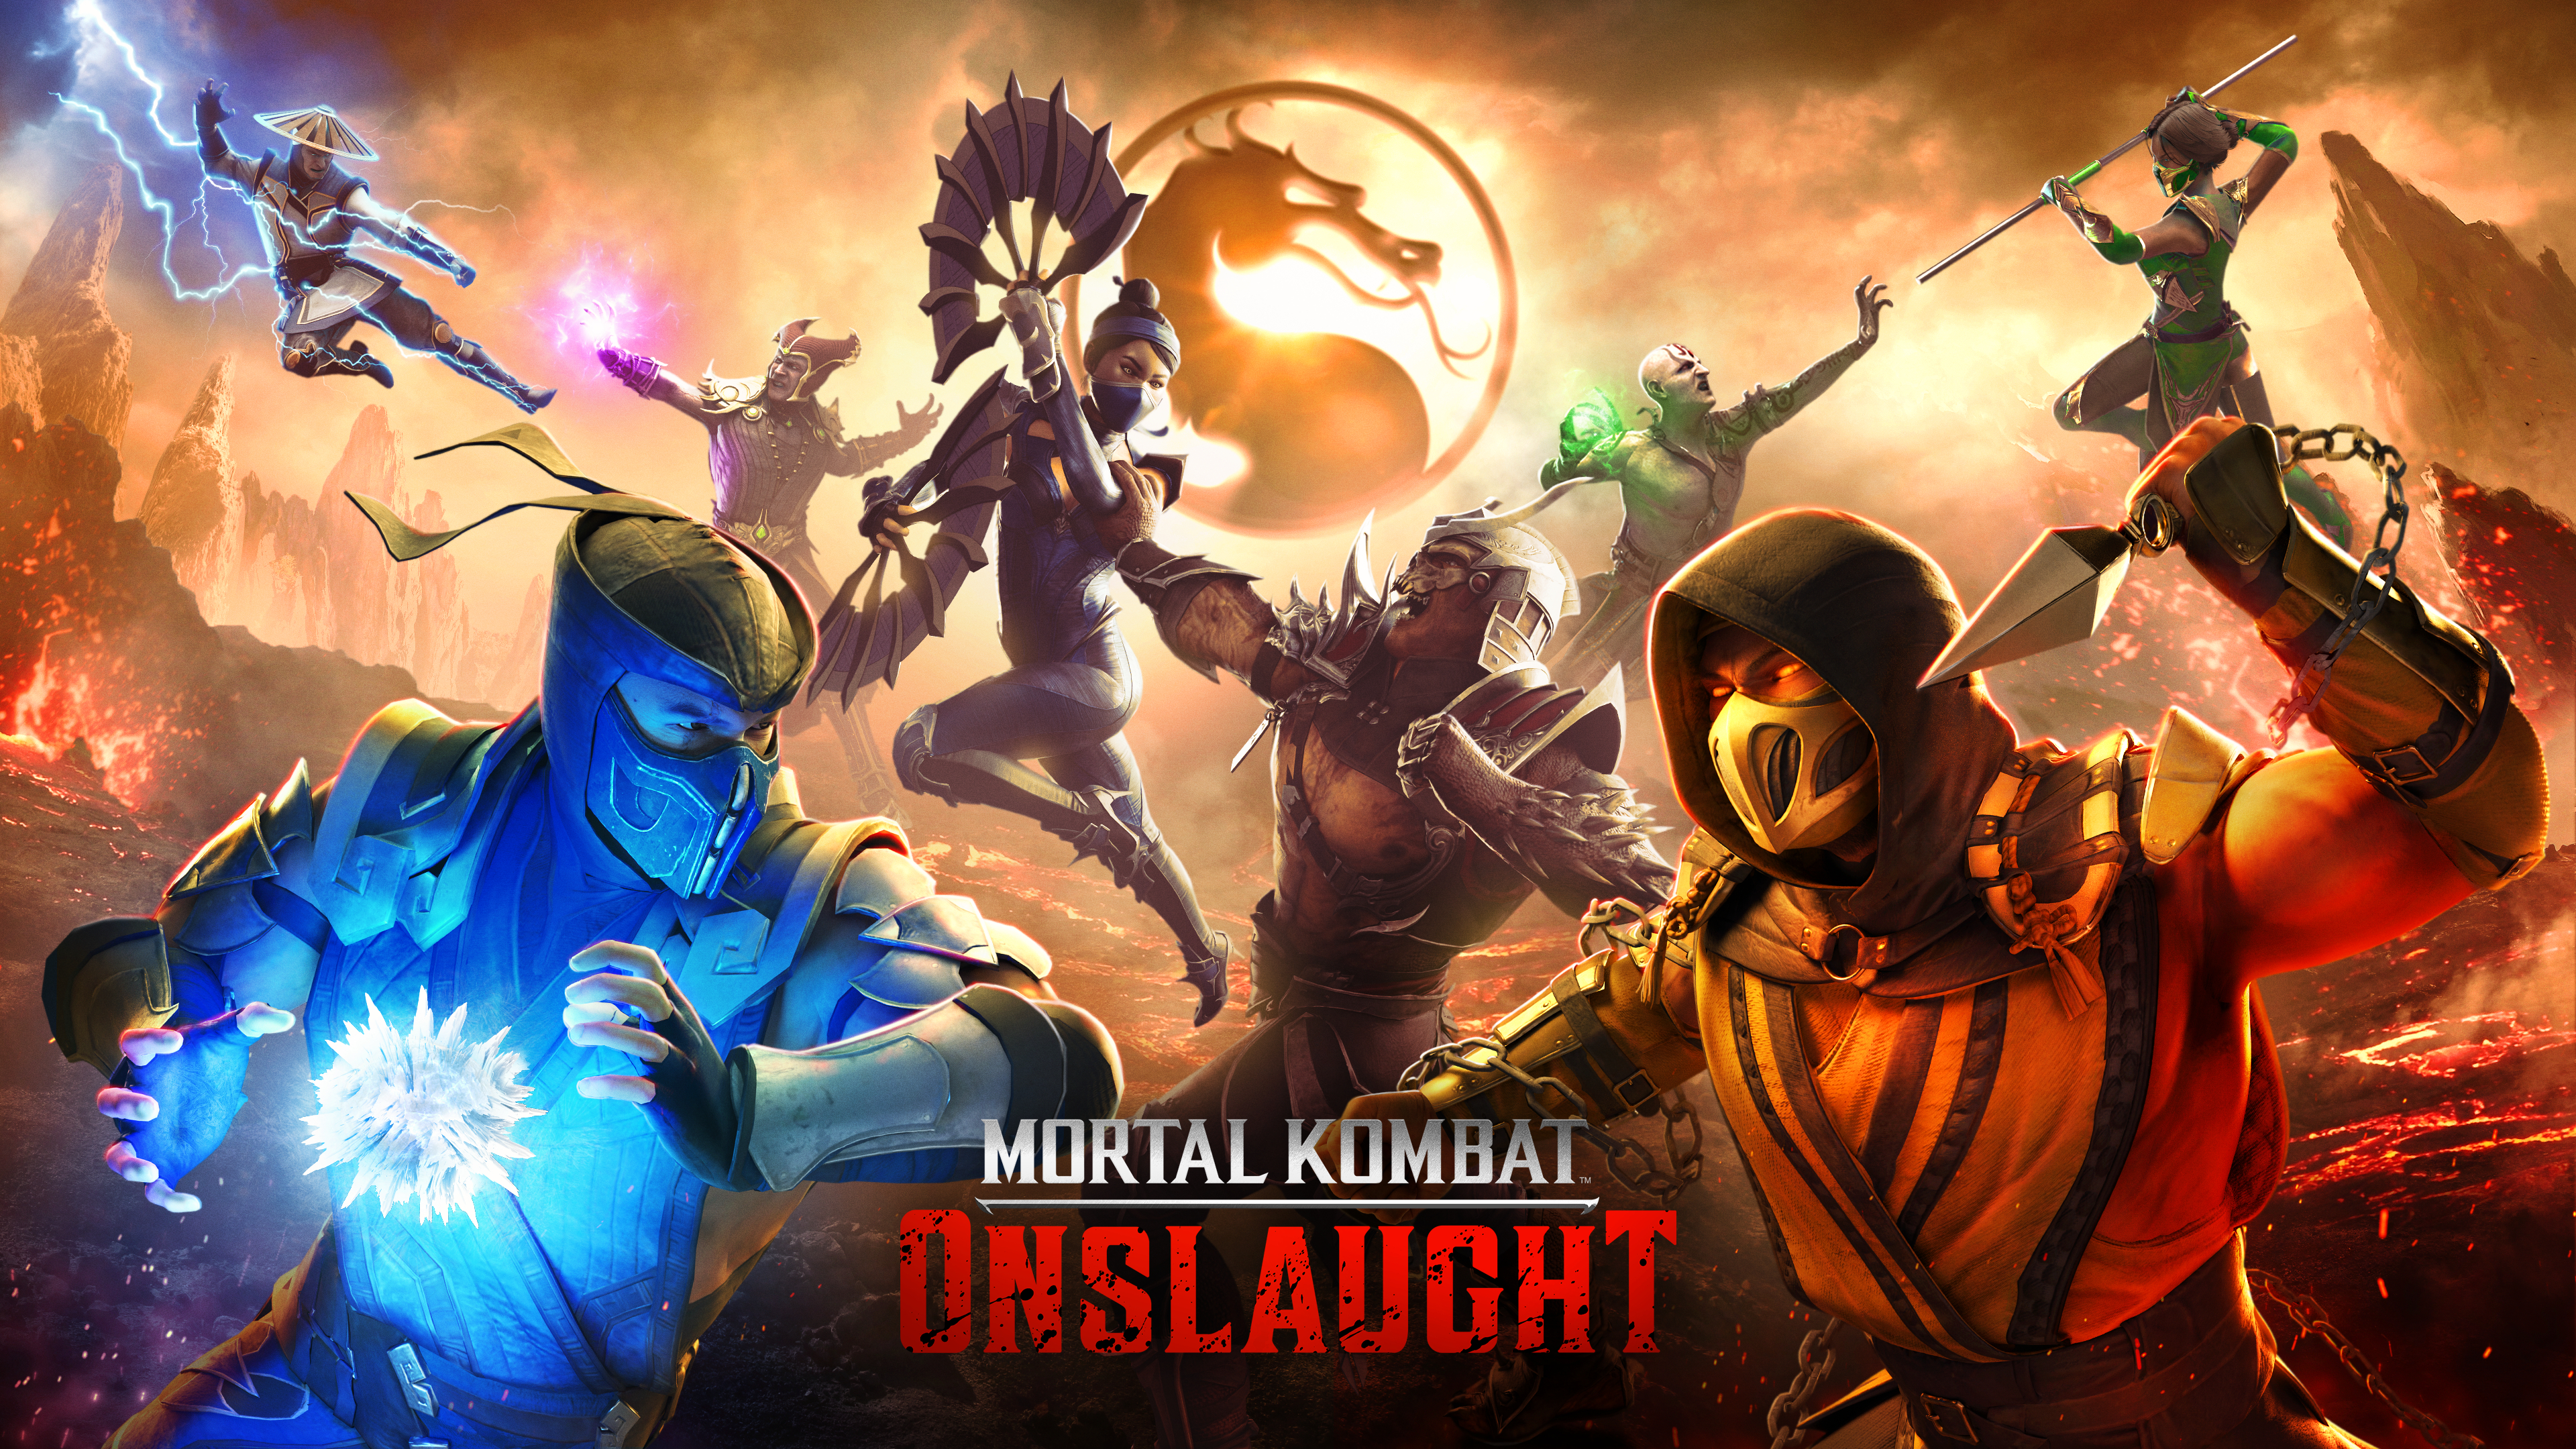 Mortal Kombat's next game is Onslaught, a mobile RPG